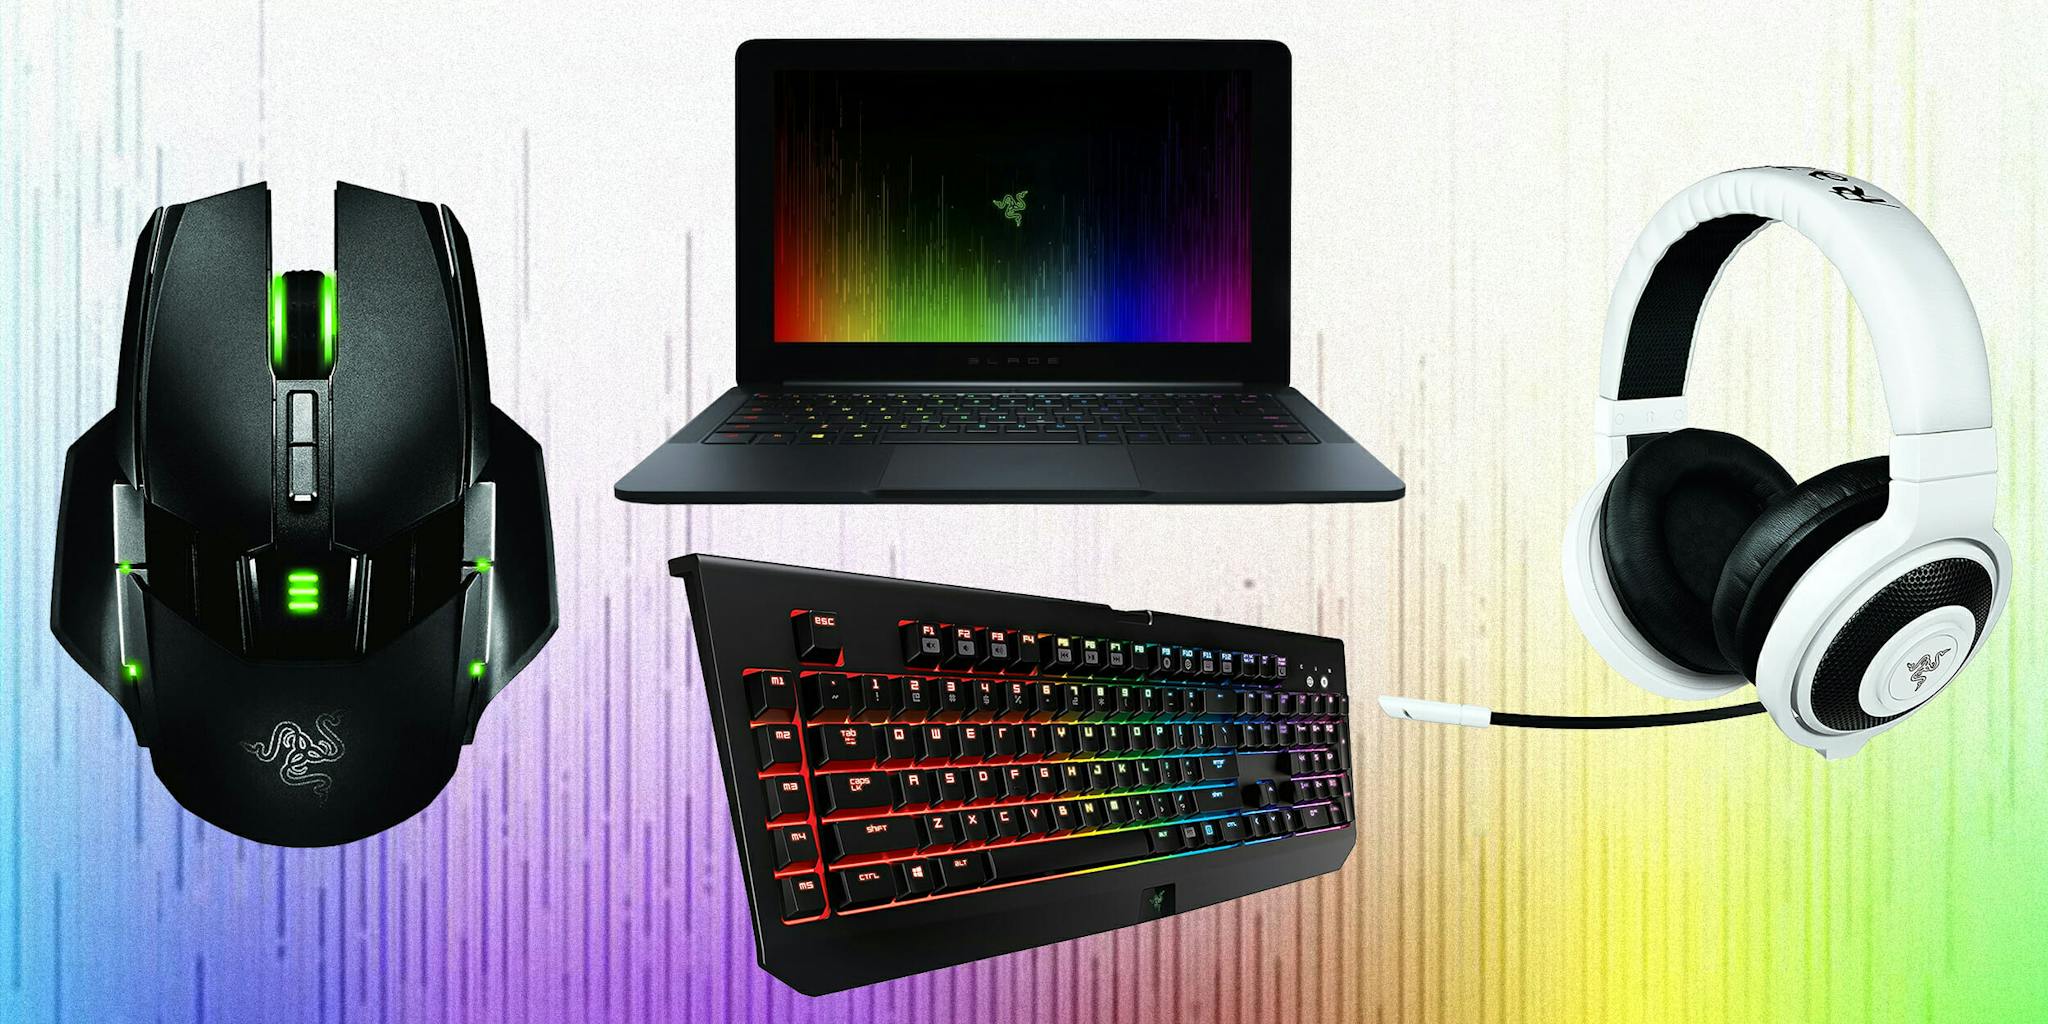 Amp your gaming experience with 40 percent off Razer accessories - The